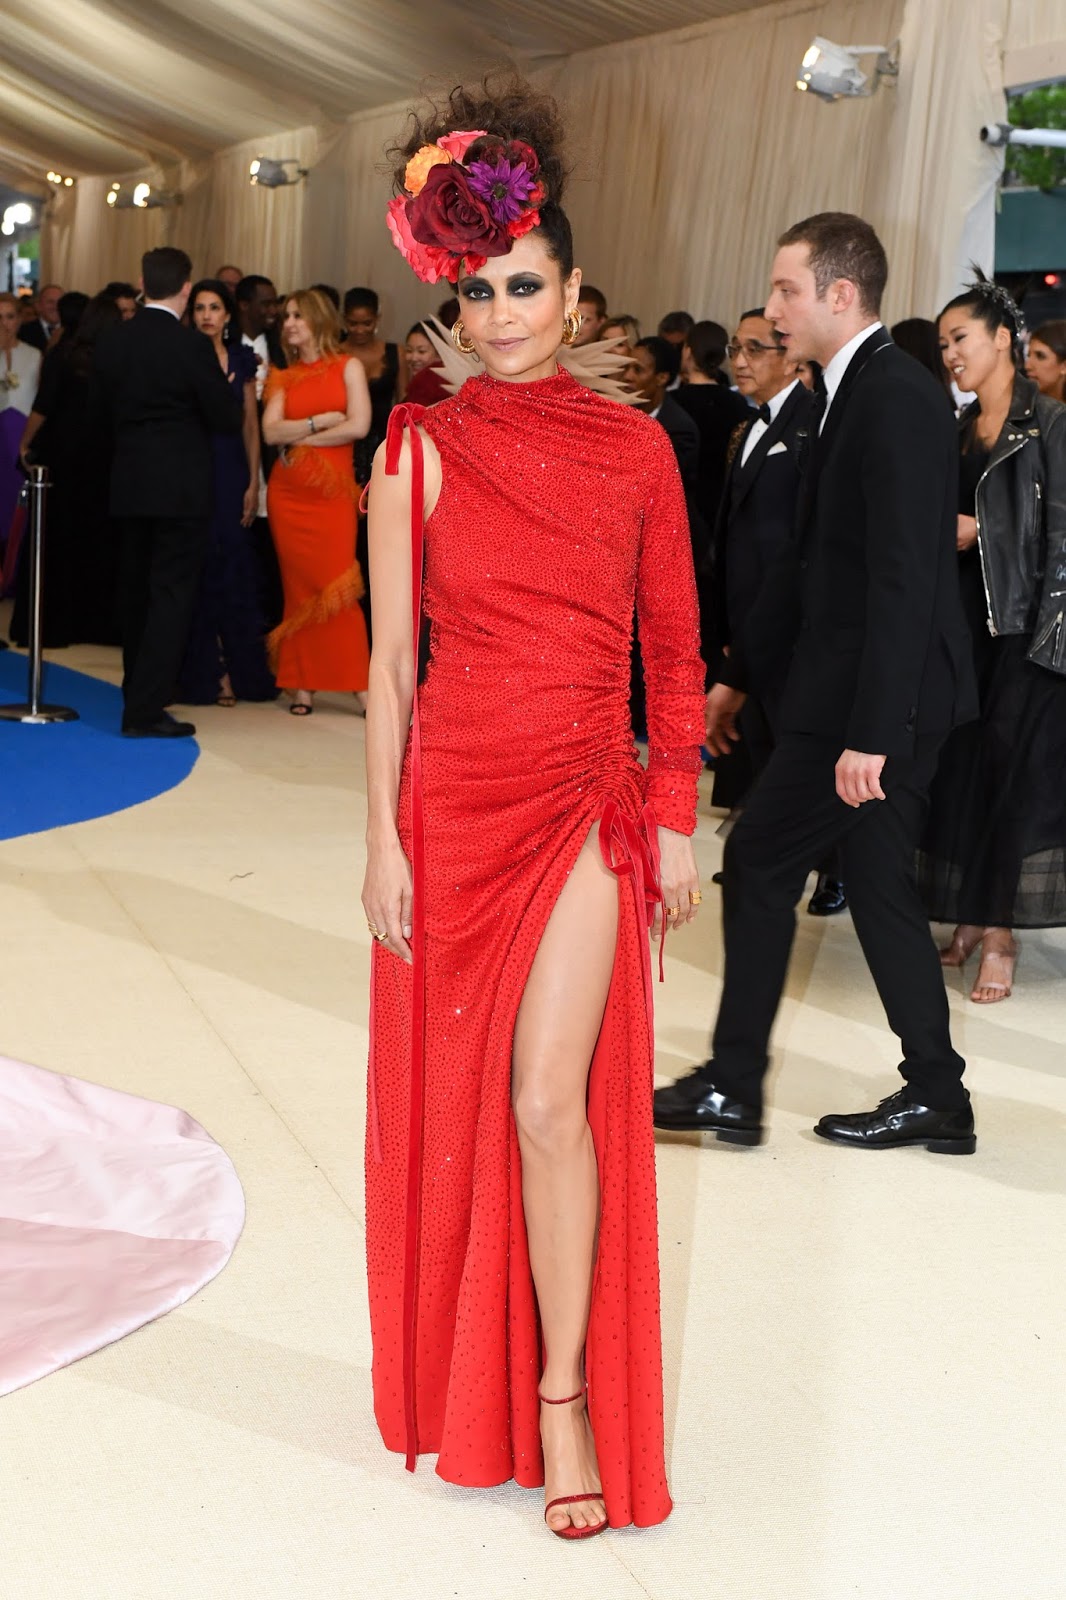 The MET GALA: It's about the DRAMA